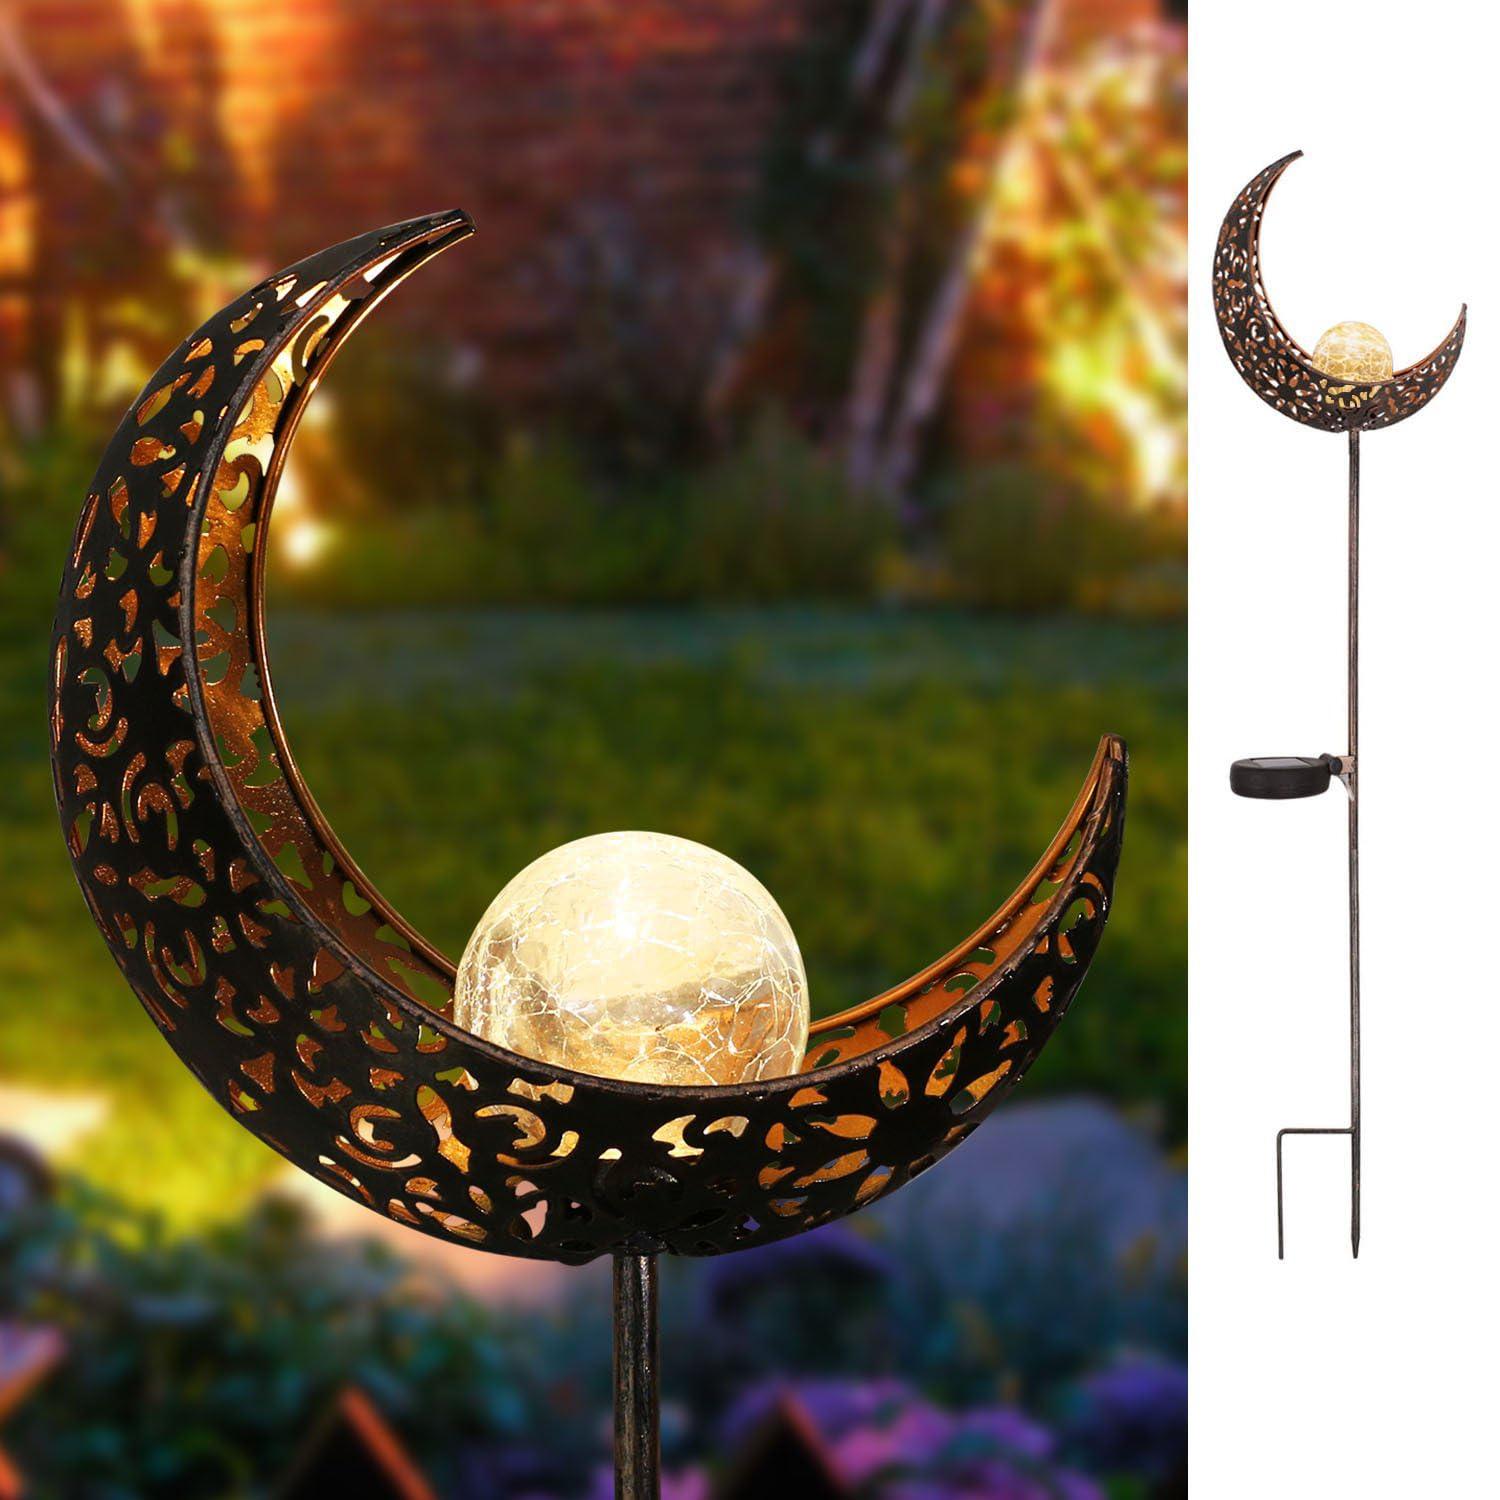 HOMEIMPRO Moon Solar Garden Lights Outdoor Stakes, Waterproof Crackle Glass Metal Decorative Lights for Lawn, Patio Accessories, Yard Decor, Christmas Gift (Bronze) - CookCave